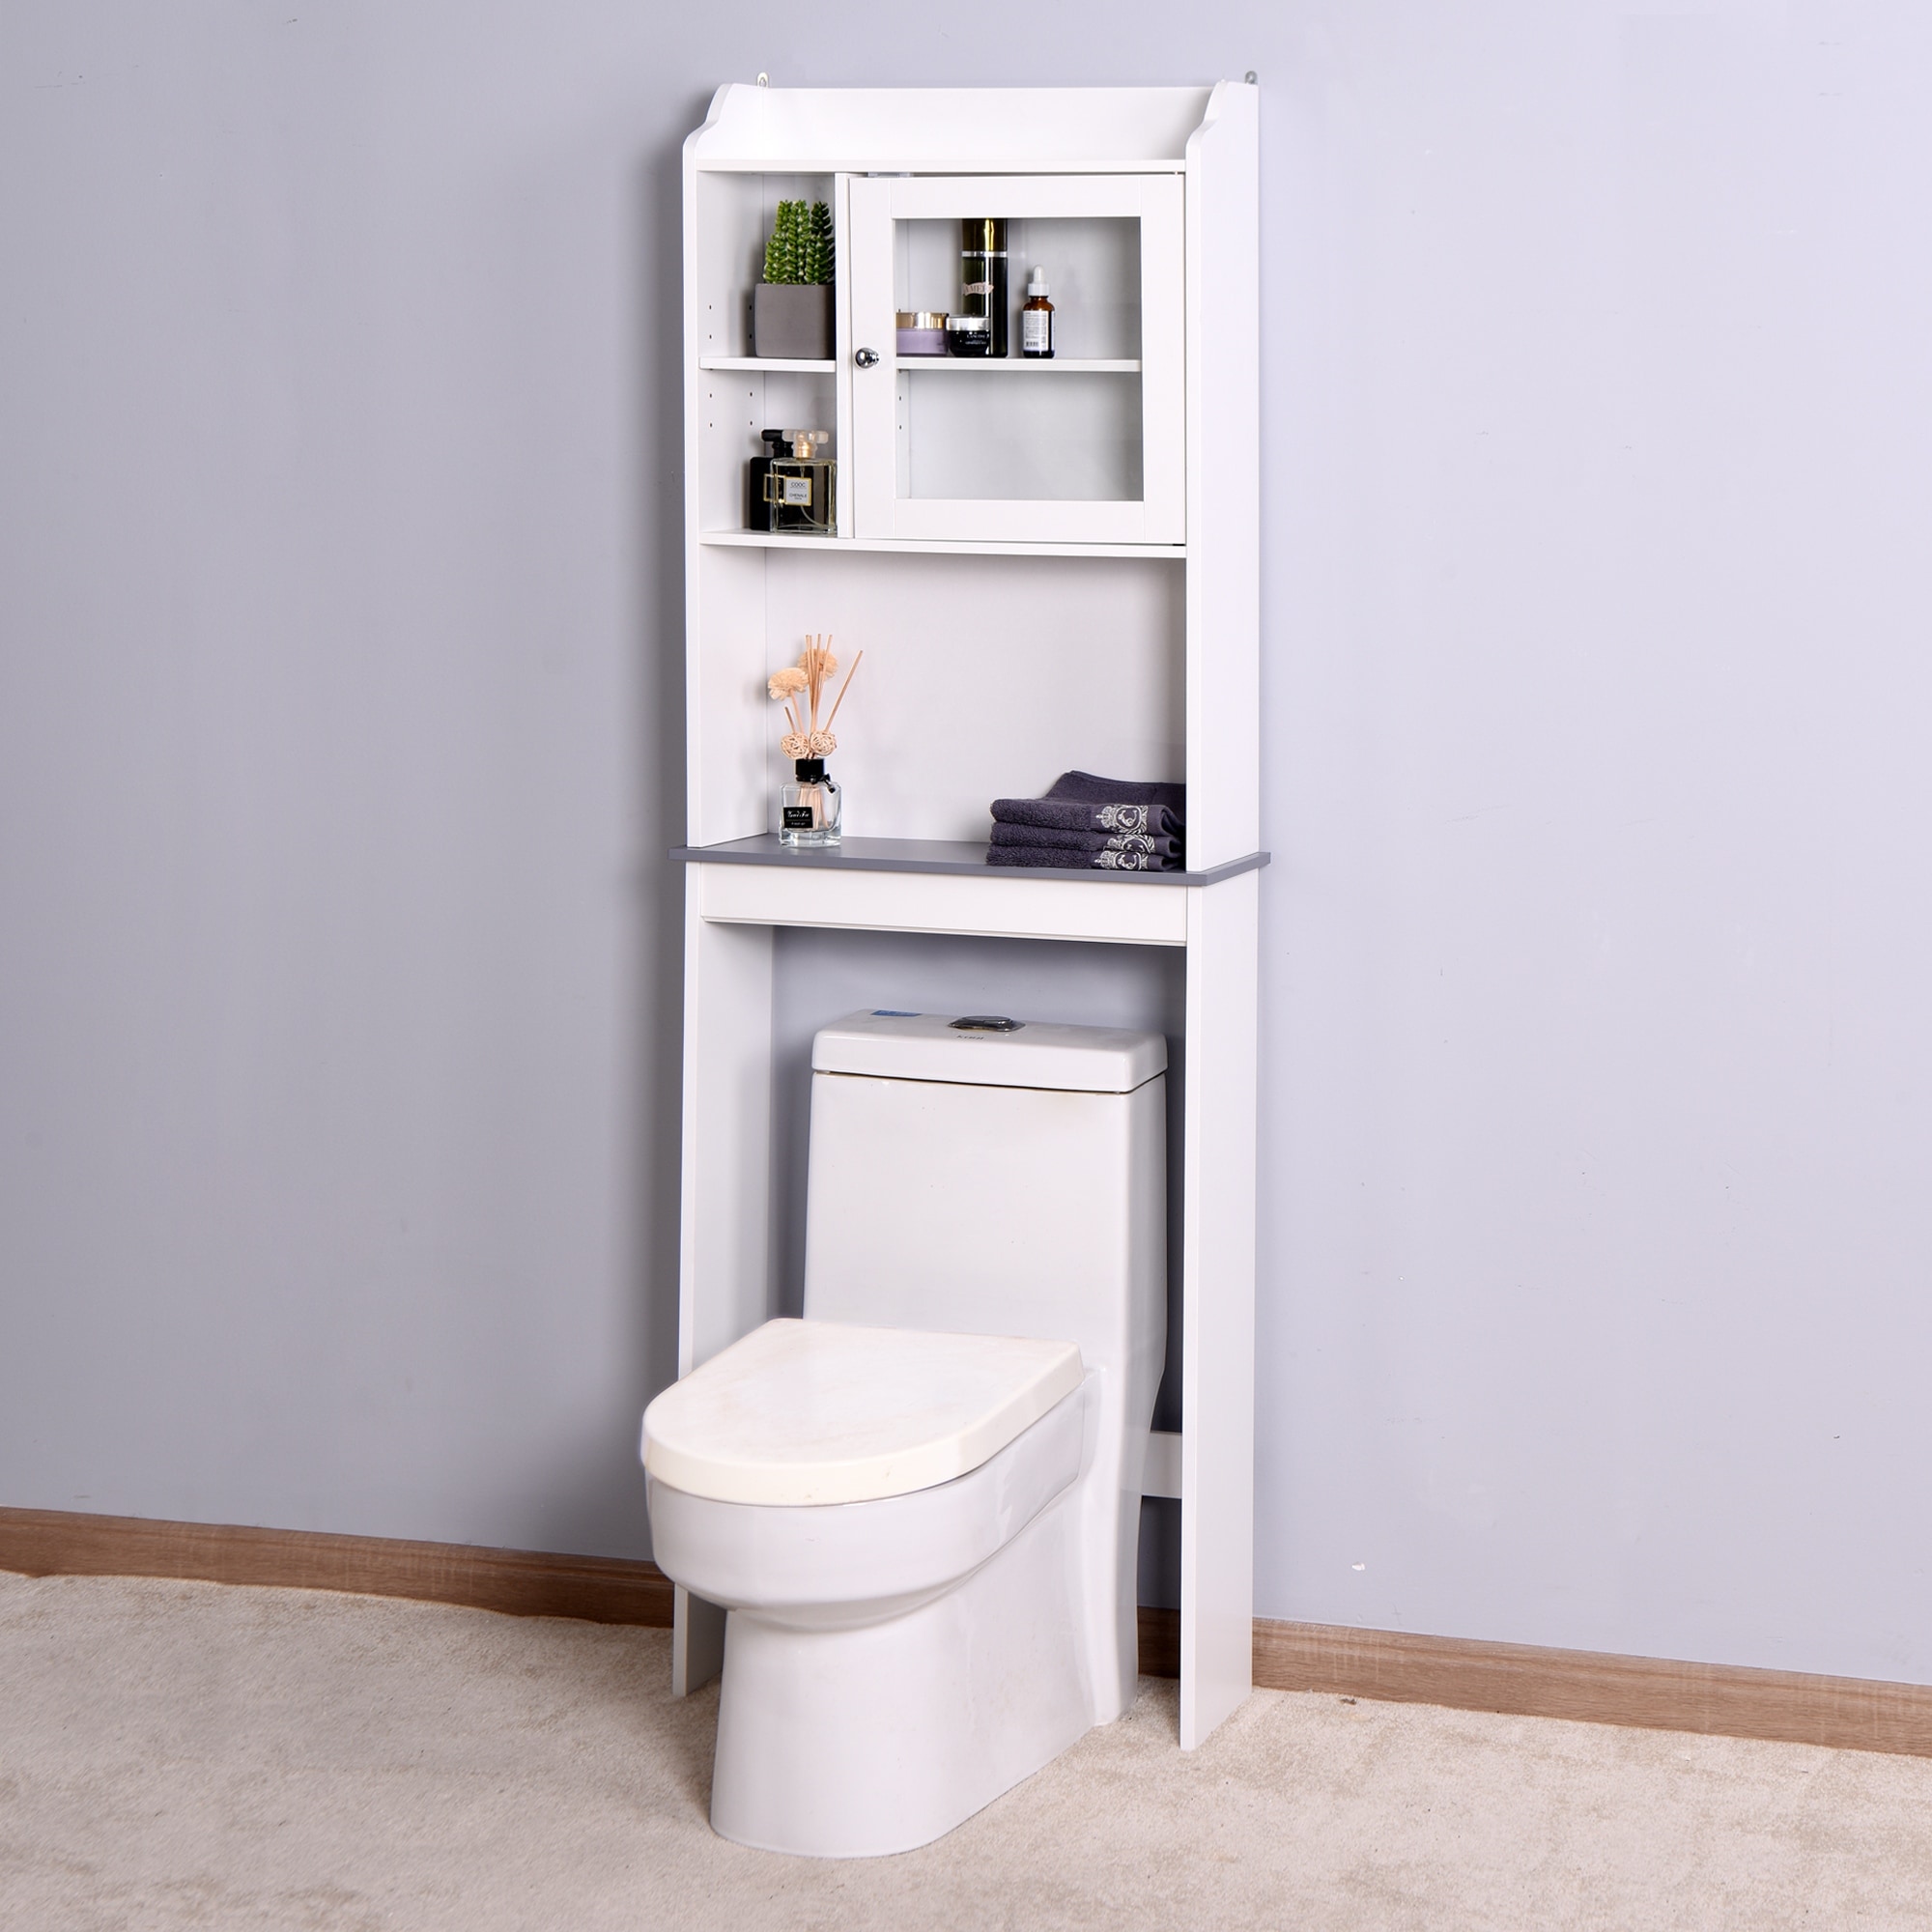 https://ak1.ostkcdn.com/images/products/is/images/direct/5f0e0c4c1a08d7fcdec0660c8a86ab857044558c/White-Over-the-Toilet-Space-Saver-Wood-Bathroom-Storage-Cabinet-with-Shelves.jpg